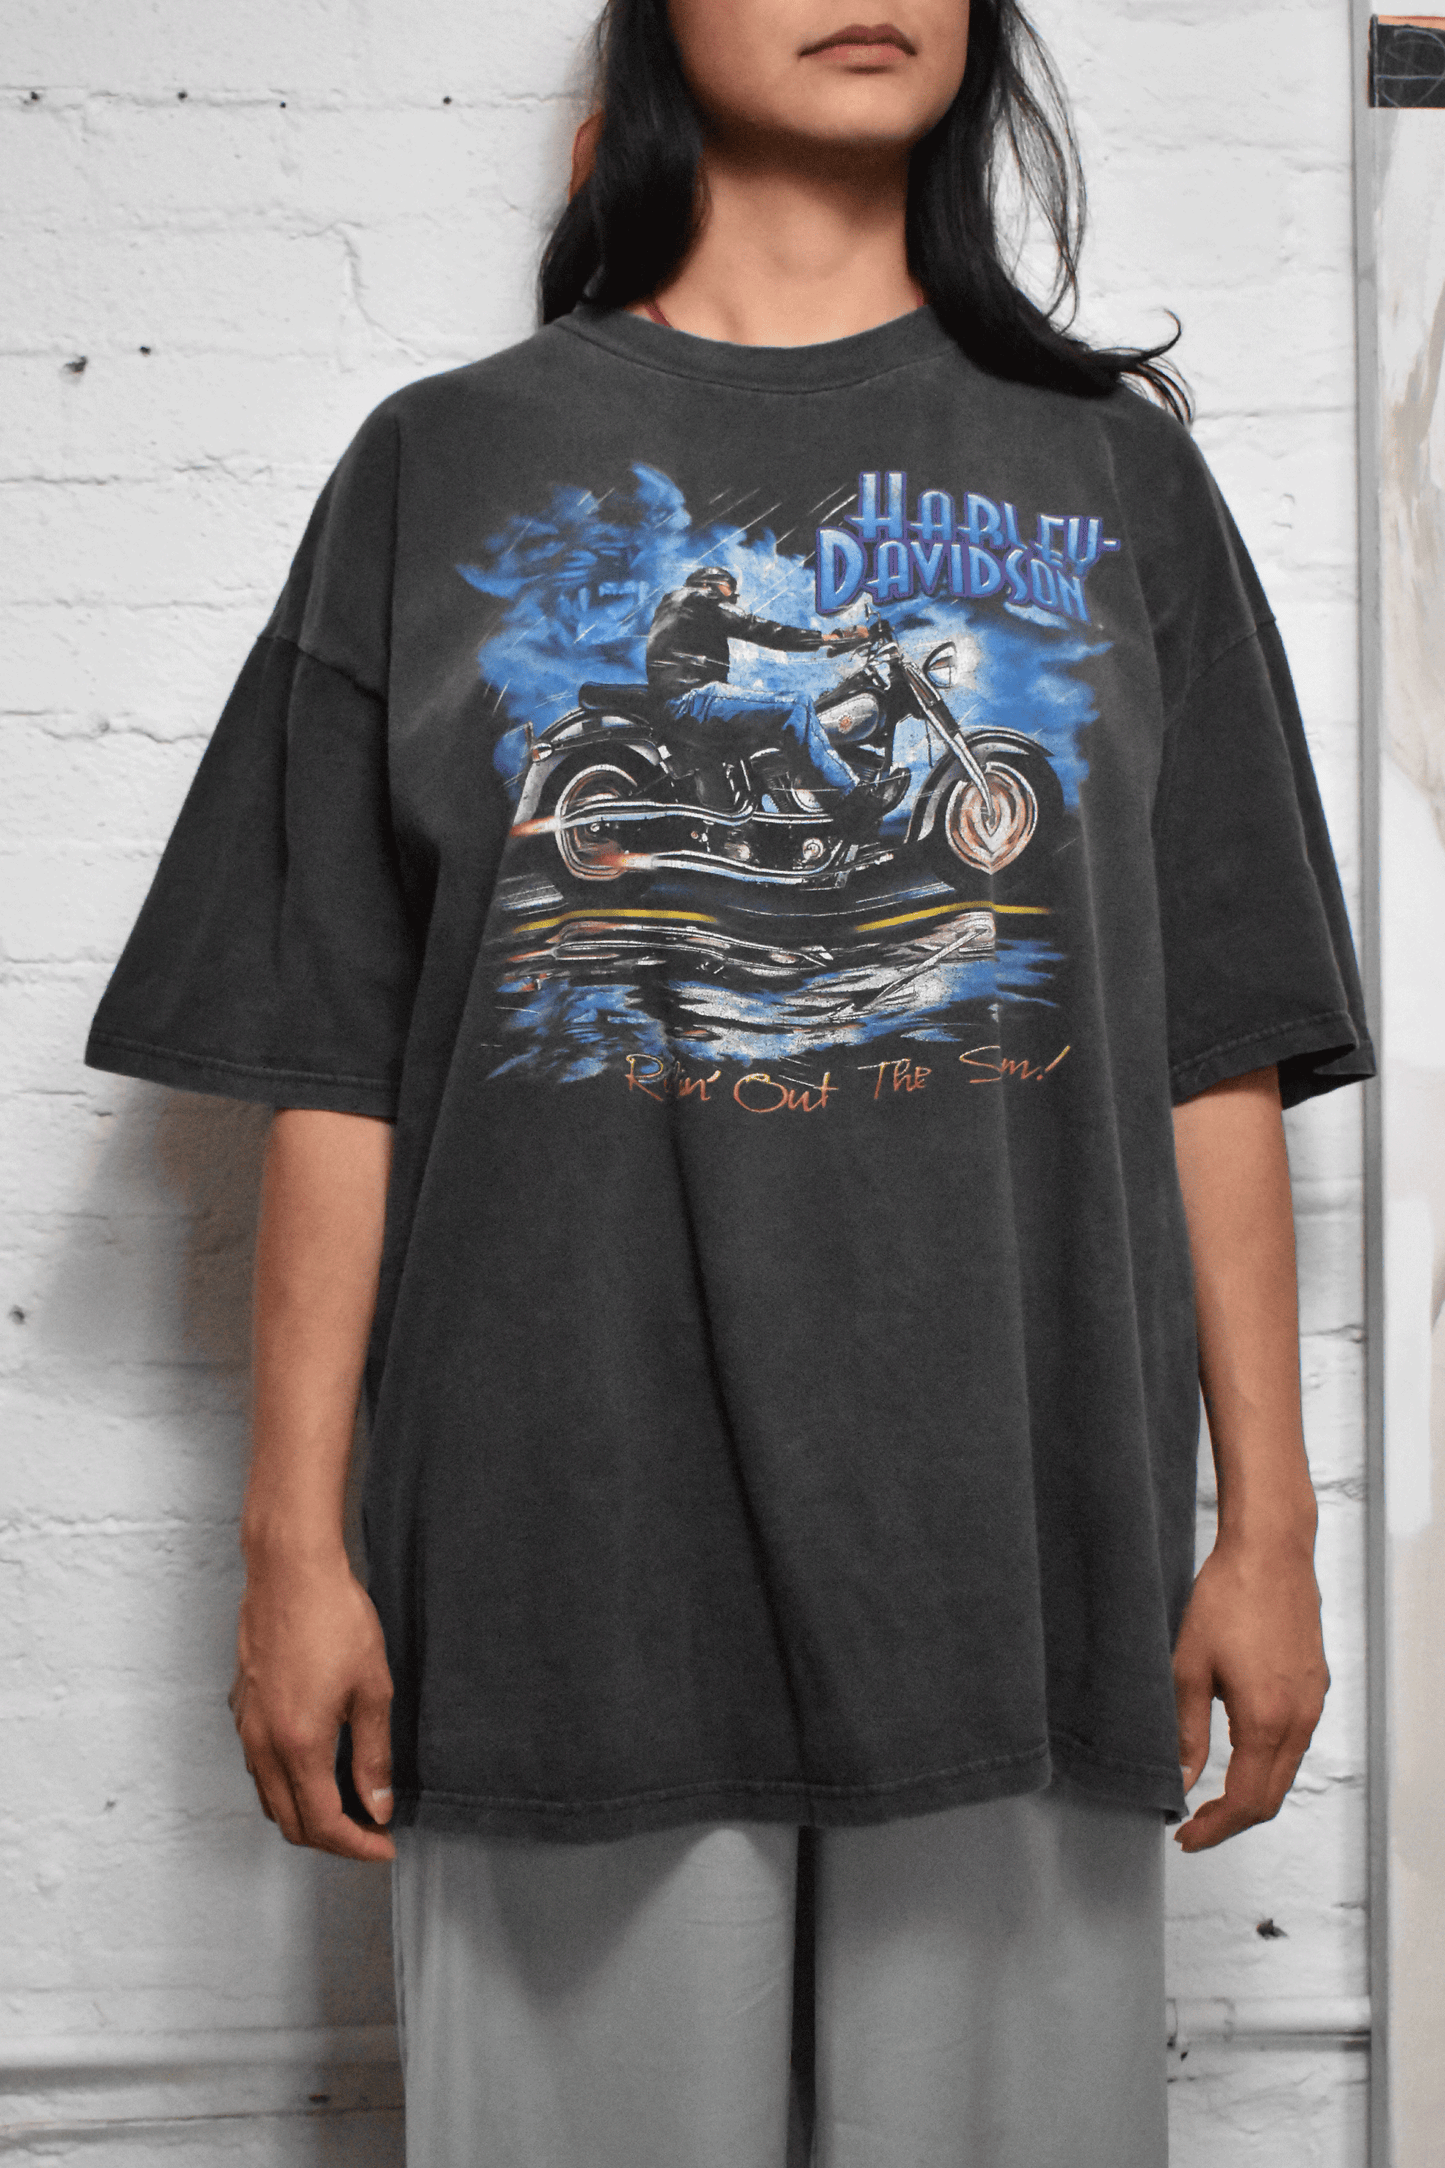 Vintage 1998 "Harley Davidson" Panther Ridin' Out The Storm T-shirt